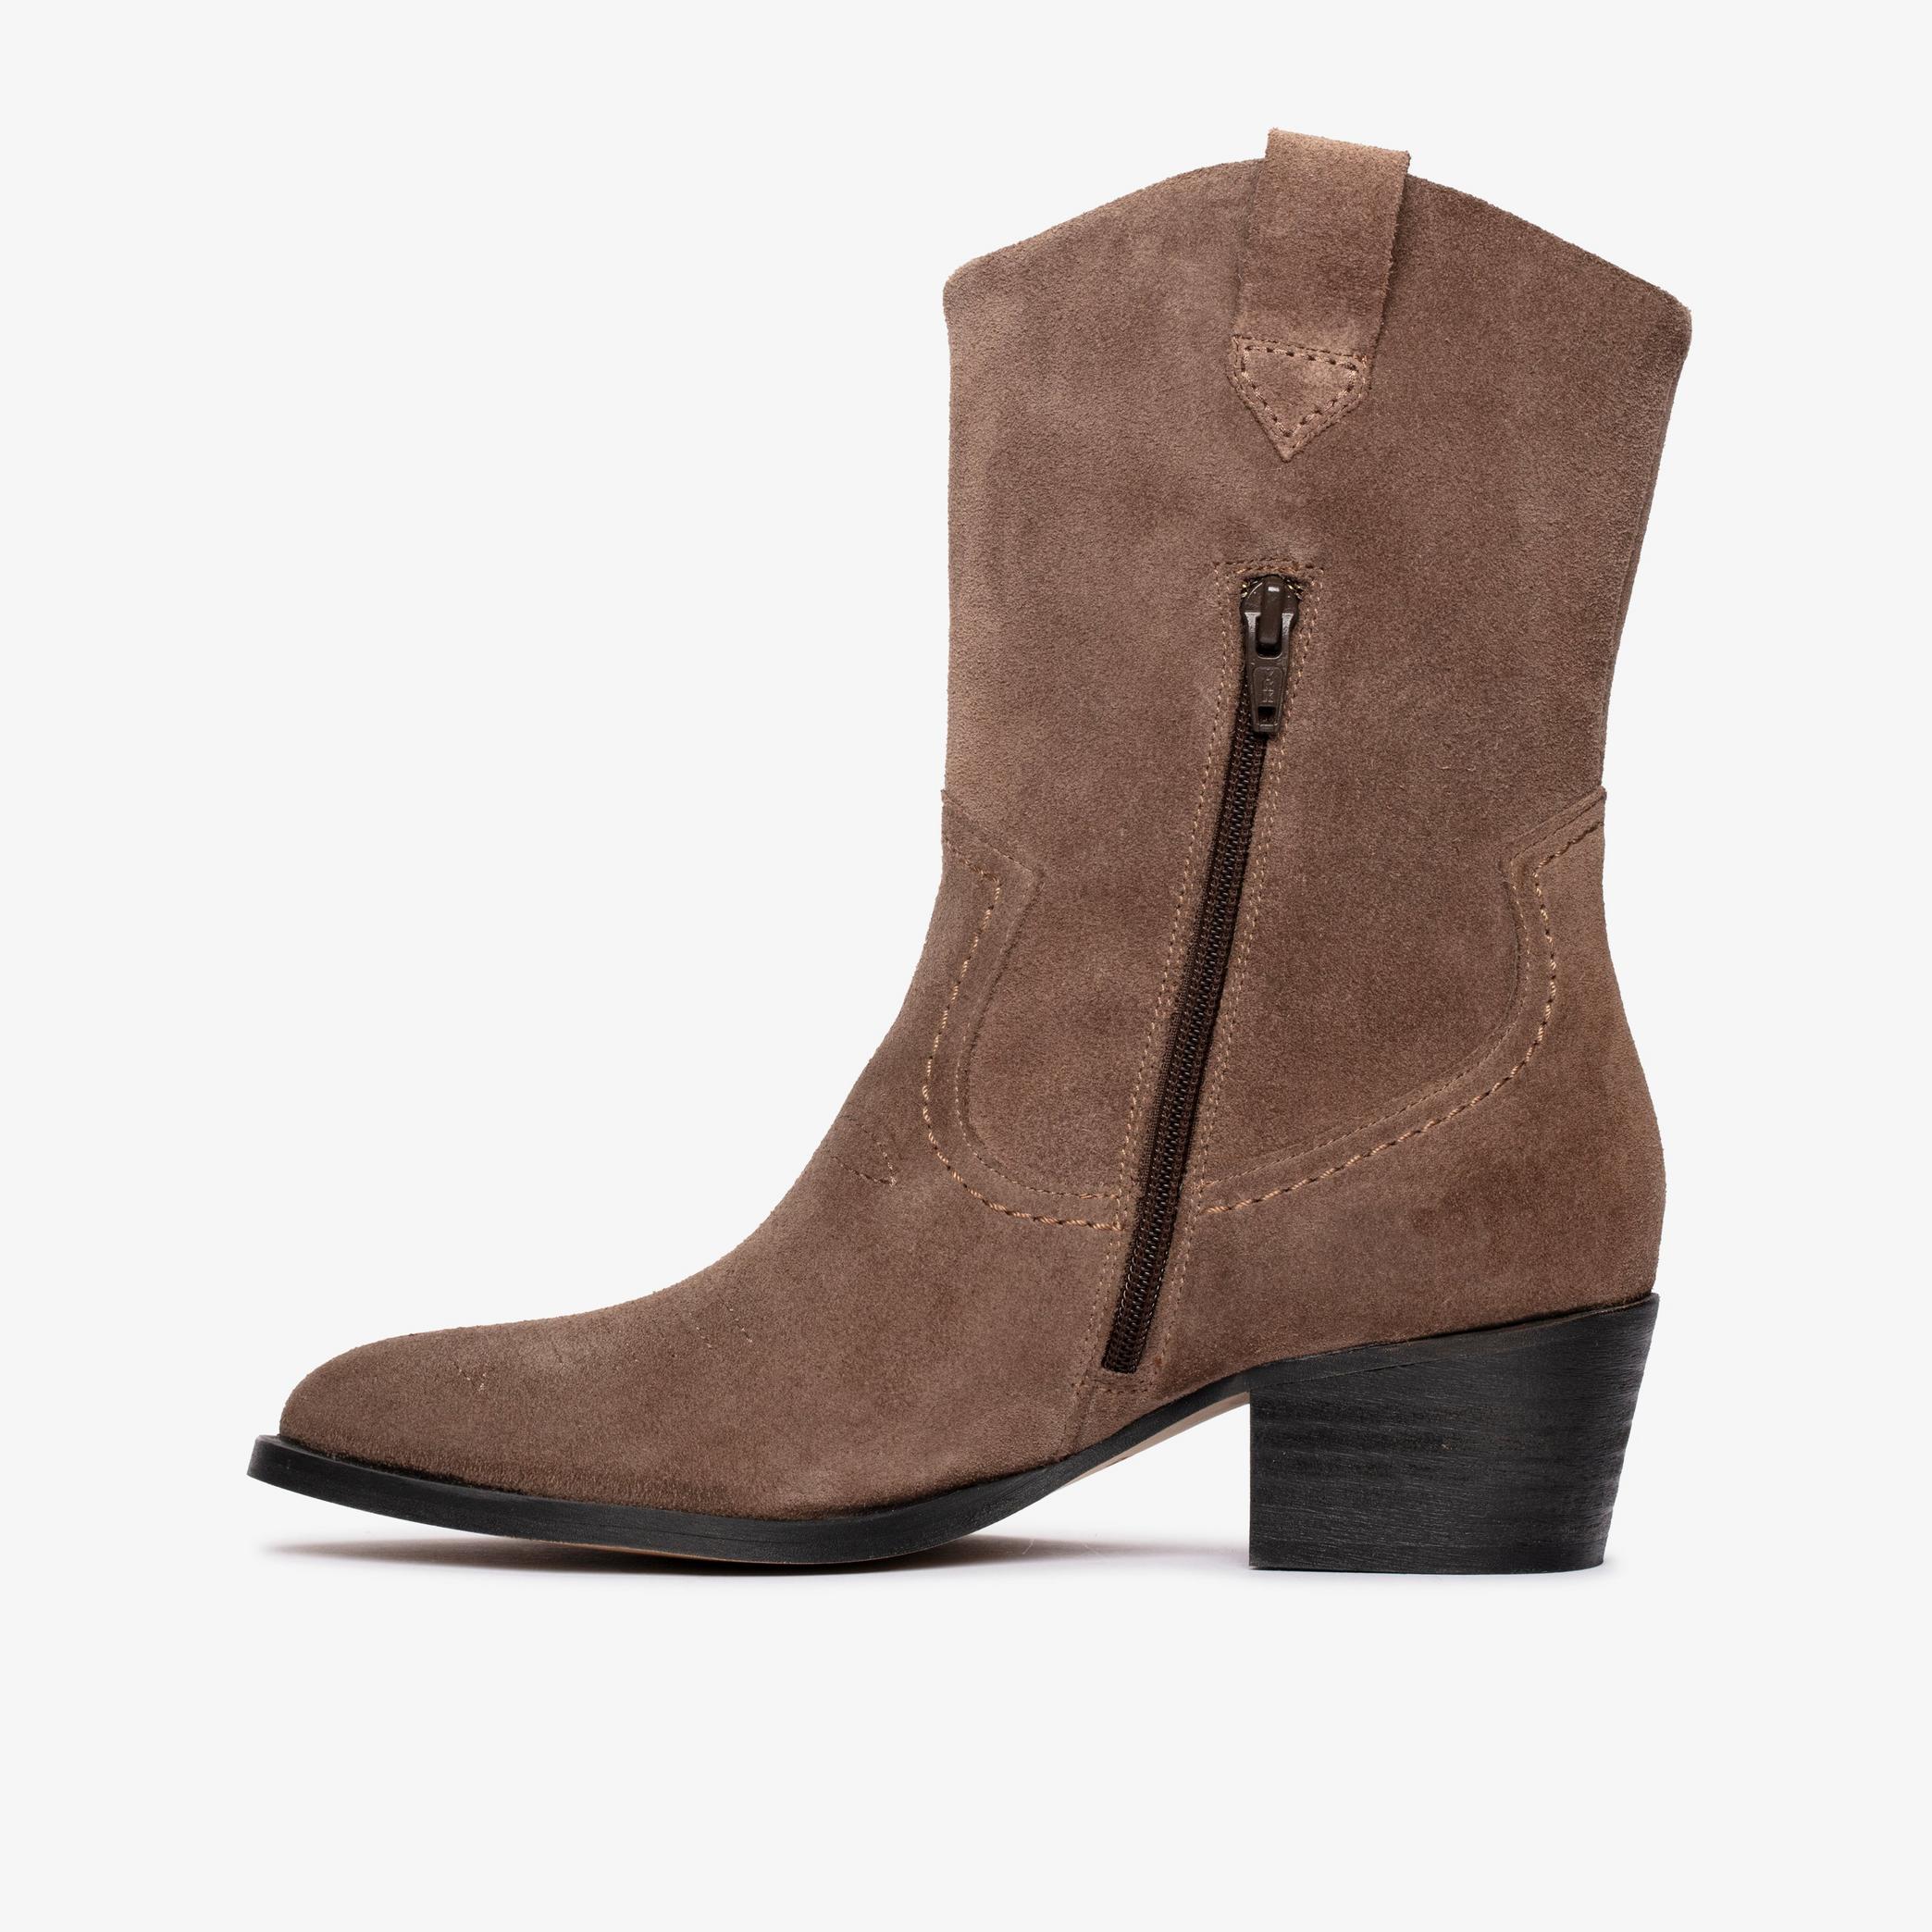 Octavia Up Taupe Suede Mid Calf Boots, view 2 of 6